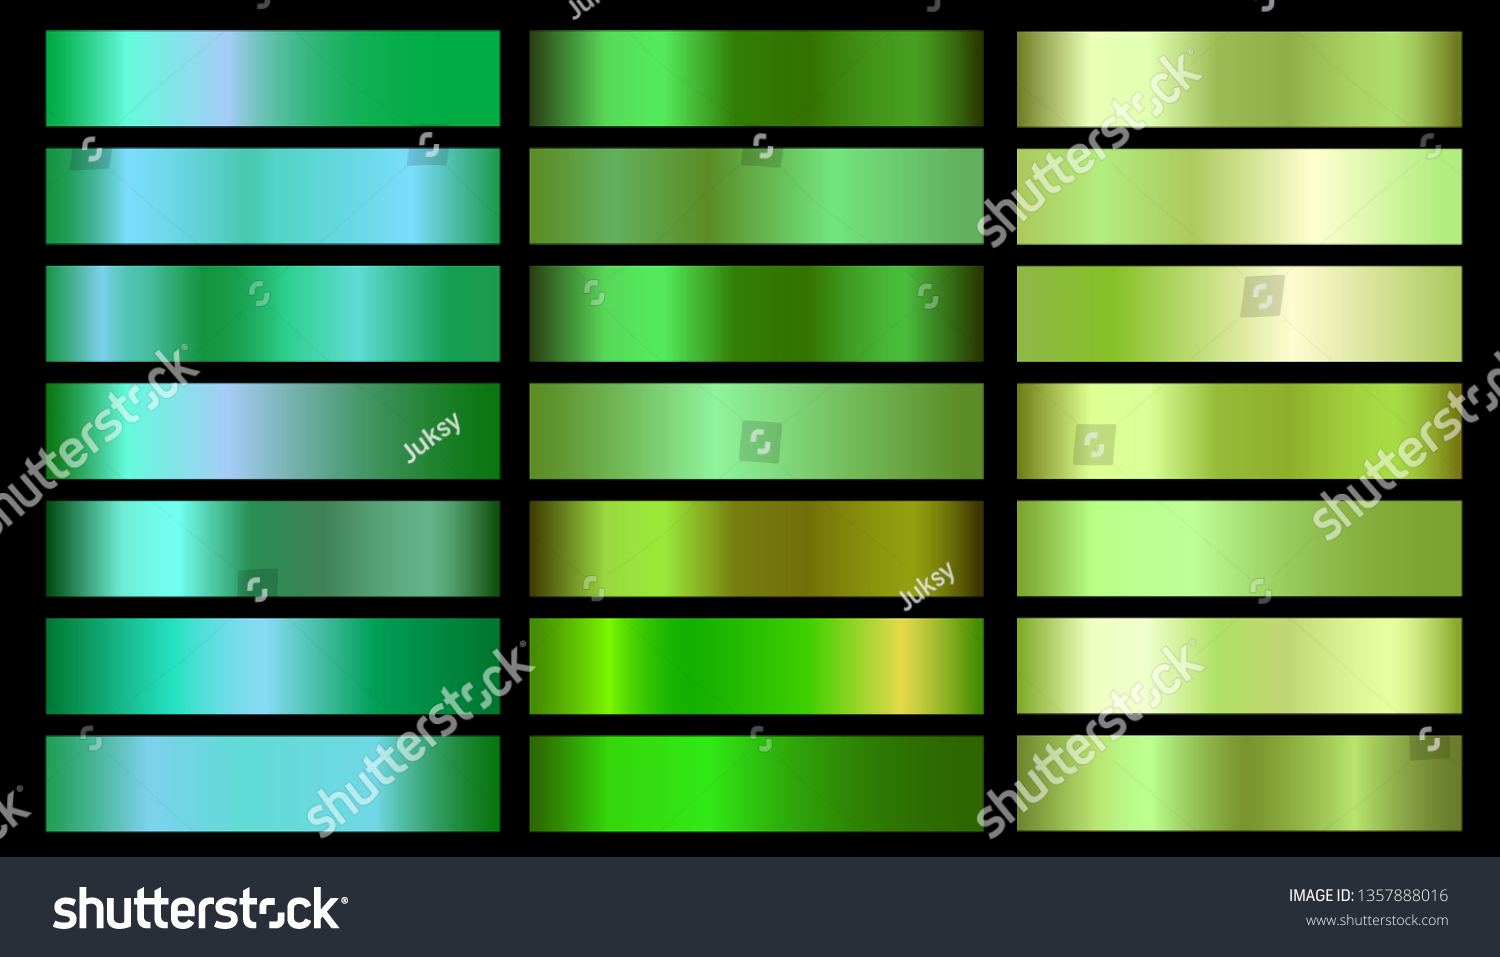 Green ecology vector gradients set. Glossy shiny nature green gradient colorful illustration gradation for backgrounds, banner, user interface, flyers, cards #1357888016